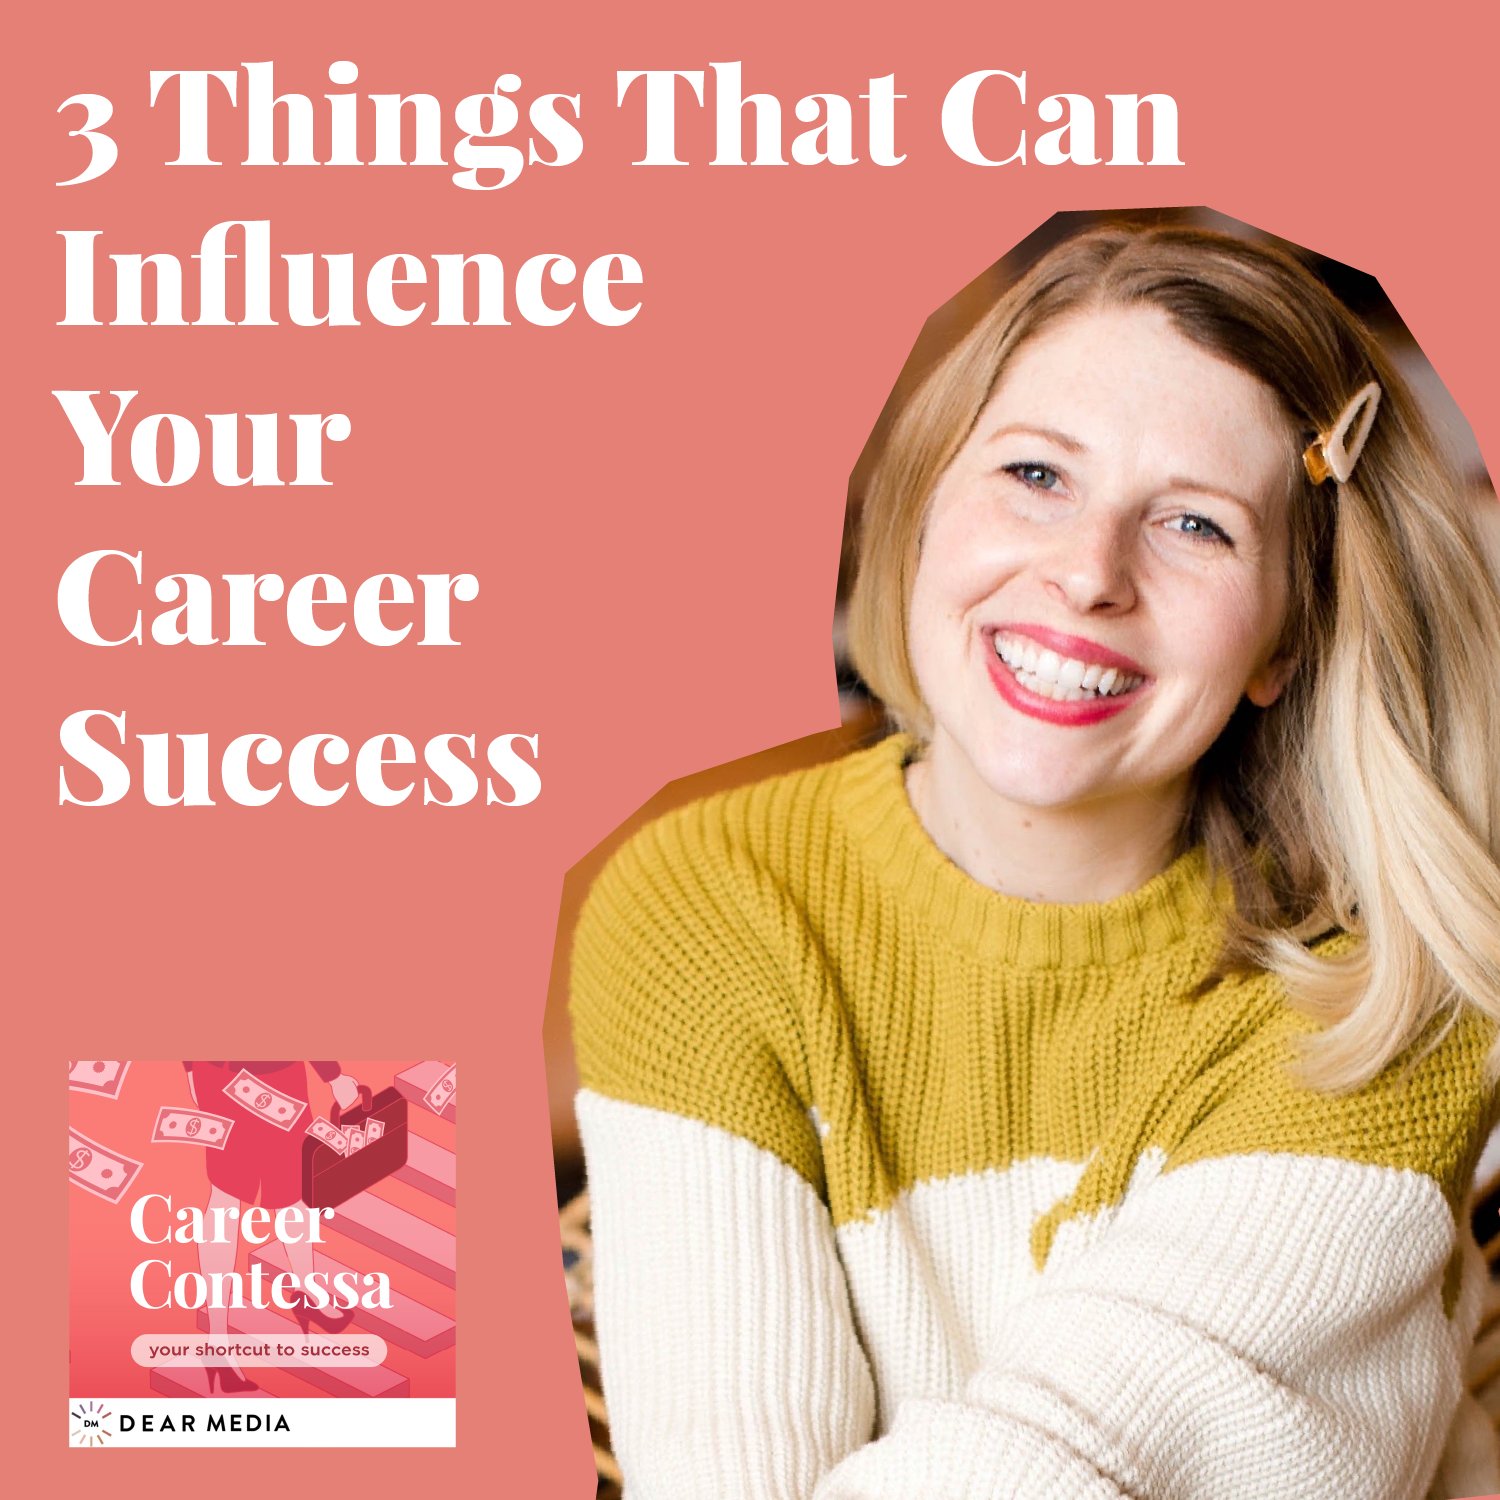 3 Things That Can Influence Your Career Success Image